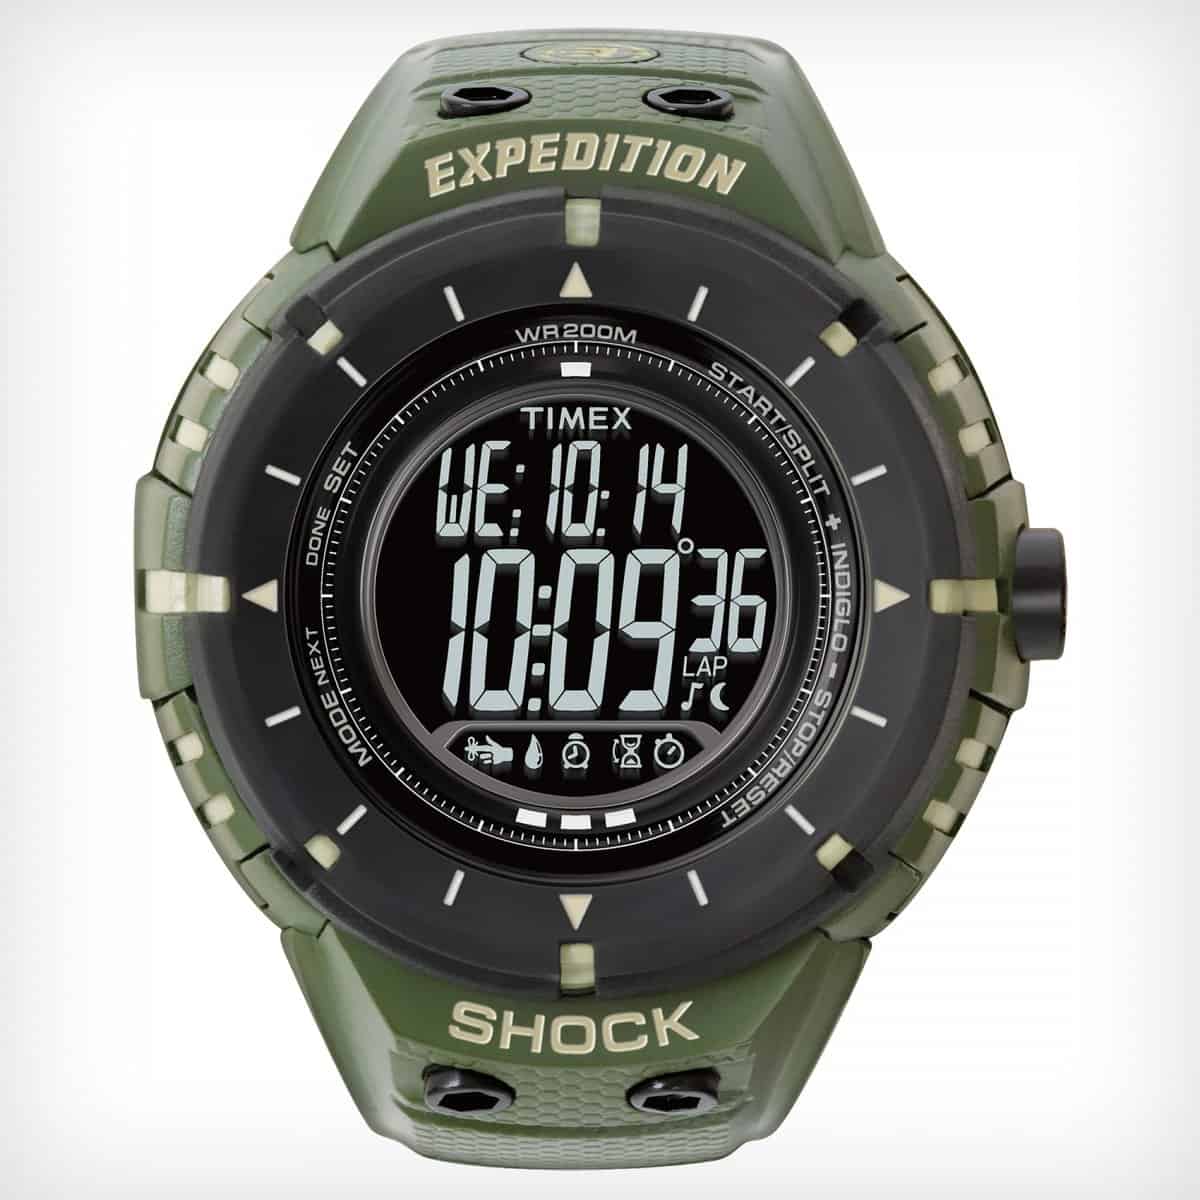 Timex Expedition Shock Digital Compass Watch